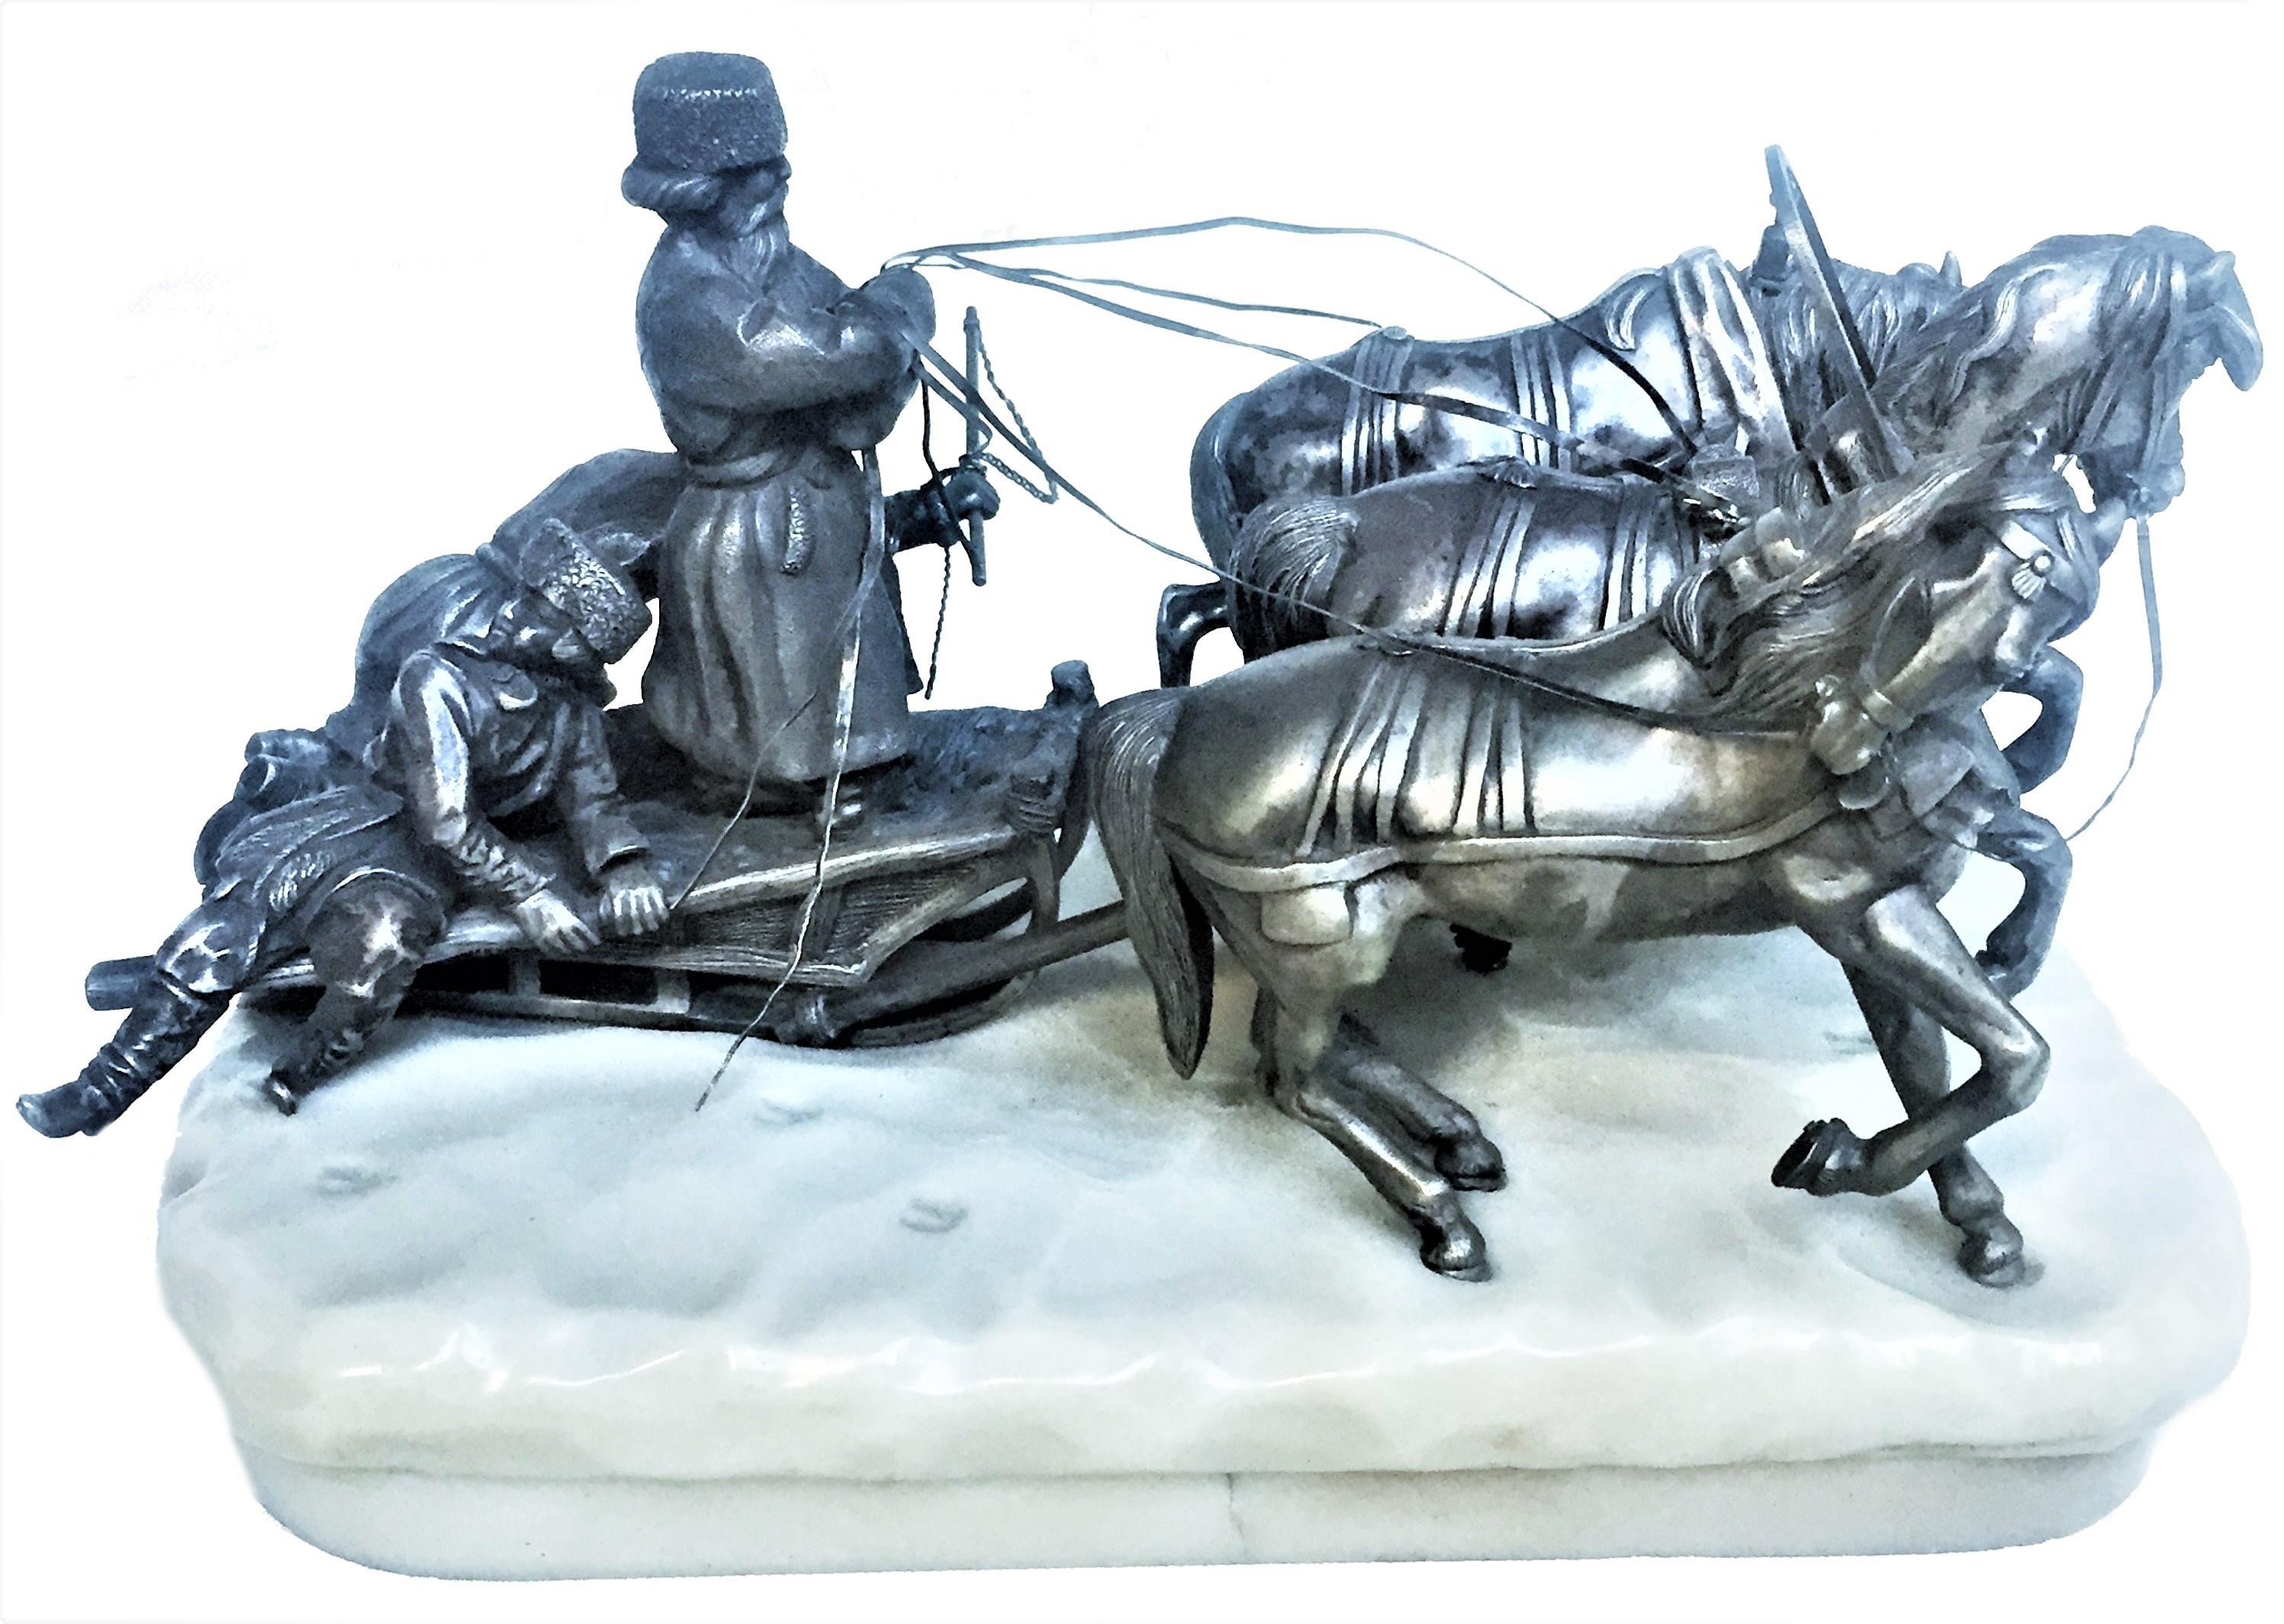 The sculpture depicts an elderly peasant, standing to his full height with reins in his hands; behind him in a sleigh are his son and grandson, who drives the horses with a whip. Dressed in typical peasant clothes, all three have very expressive